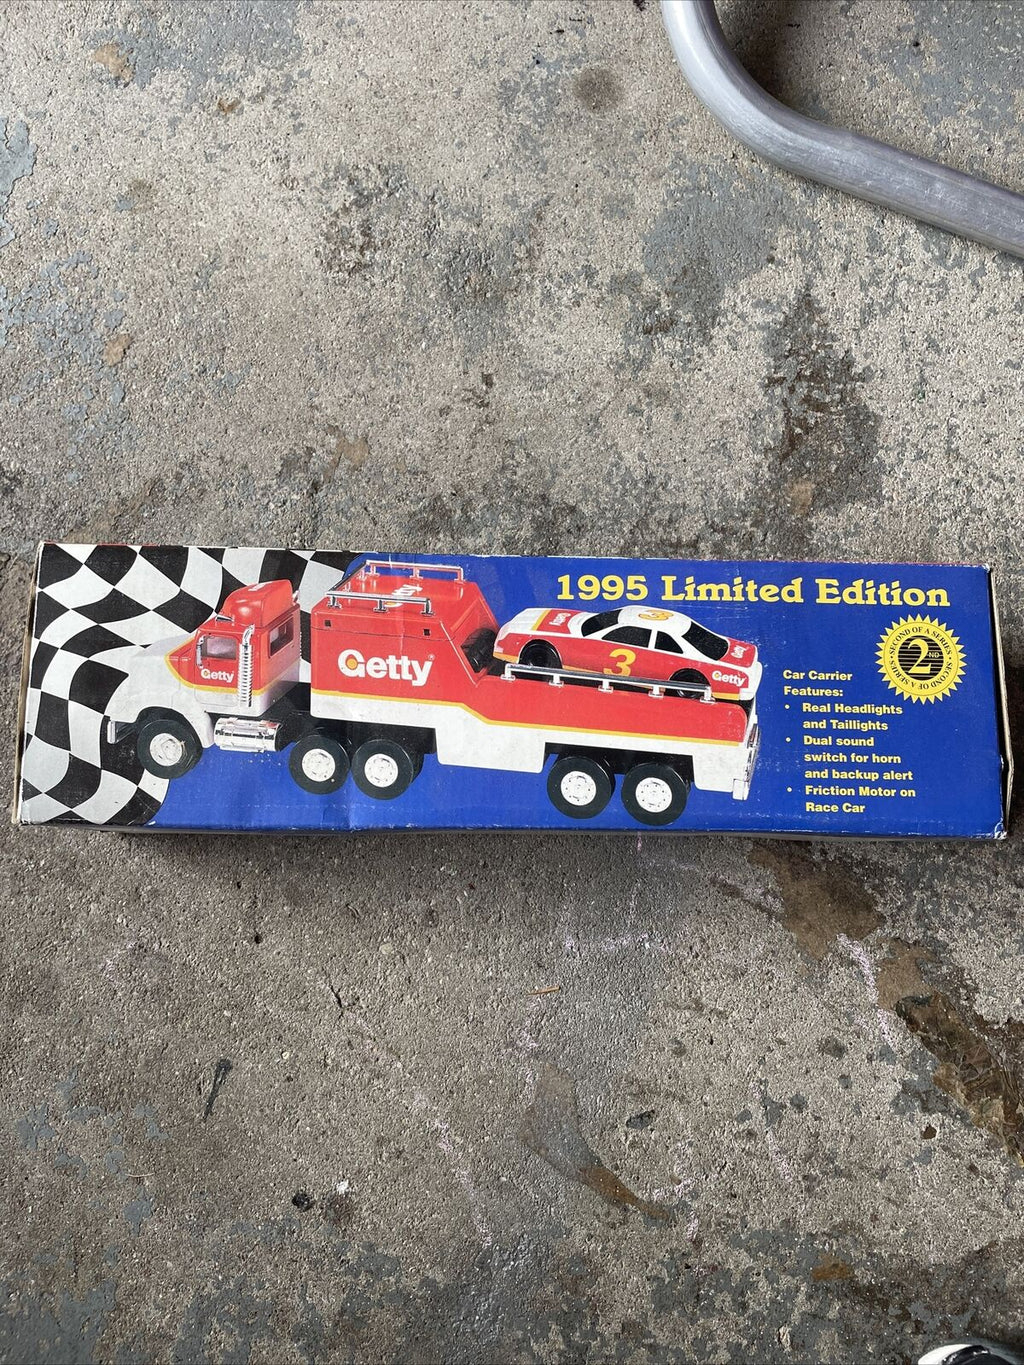 GETTY 1995 LIMITED EDITION TOY RACE CAR CARRIER